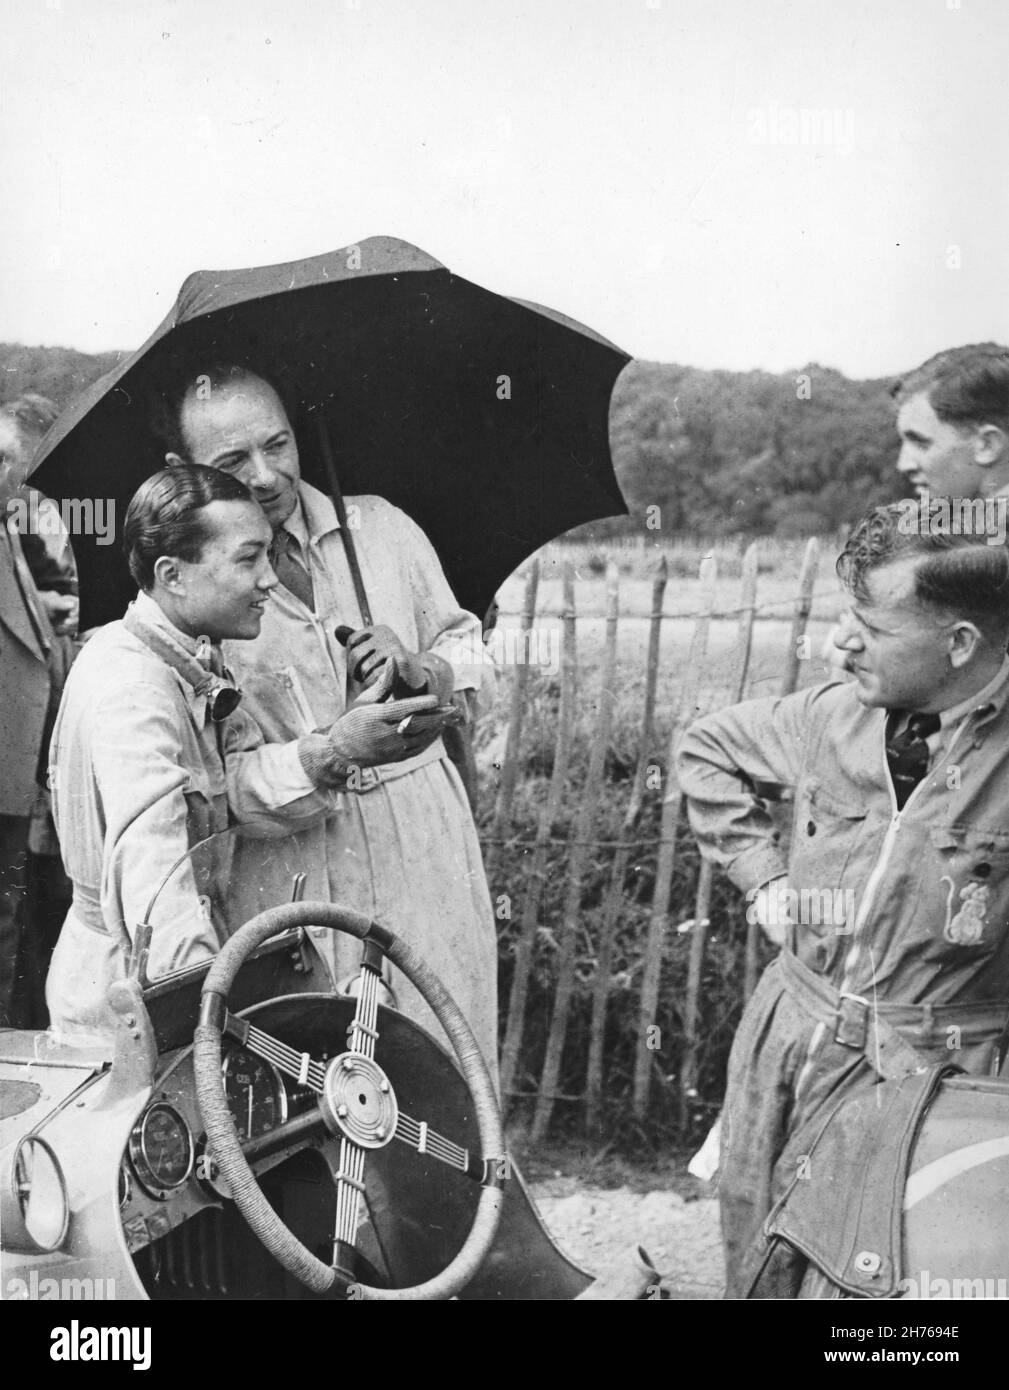 Prince B Bira from Siam (now Thailand) and Raymond Mays (both driving ERA's) with one of Bira's White Mouse Stable mechanics on the right. This is in the Donington Park paddock, on the day of the Nuffield Trophy, 10th June 1939 photograph Taken by T W Green. Stock Photo